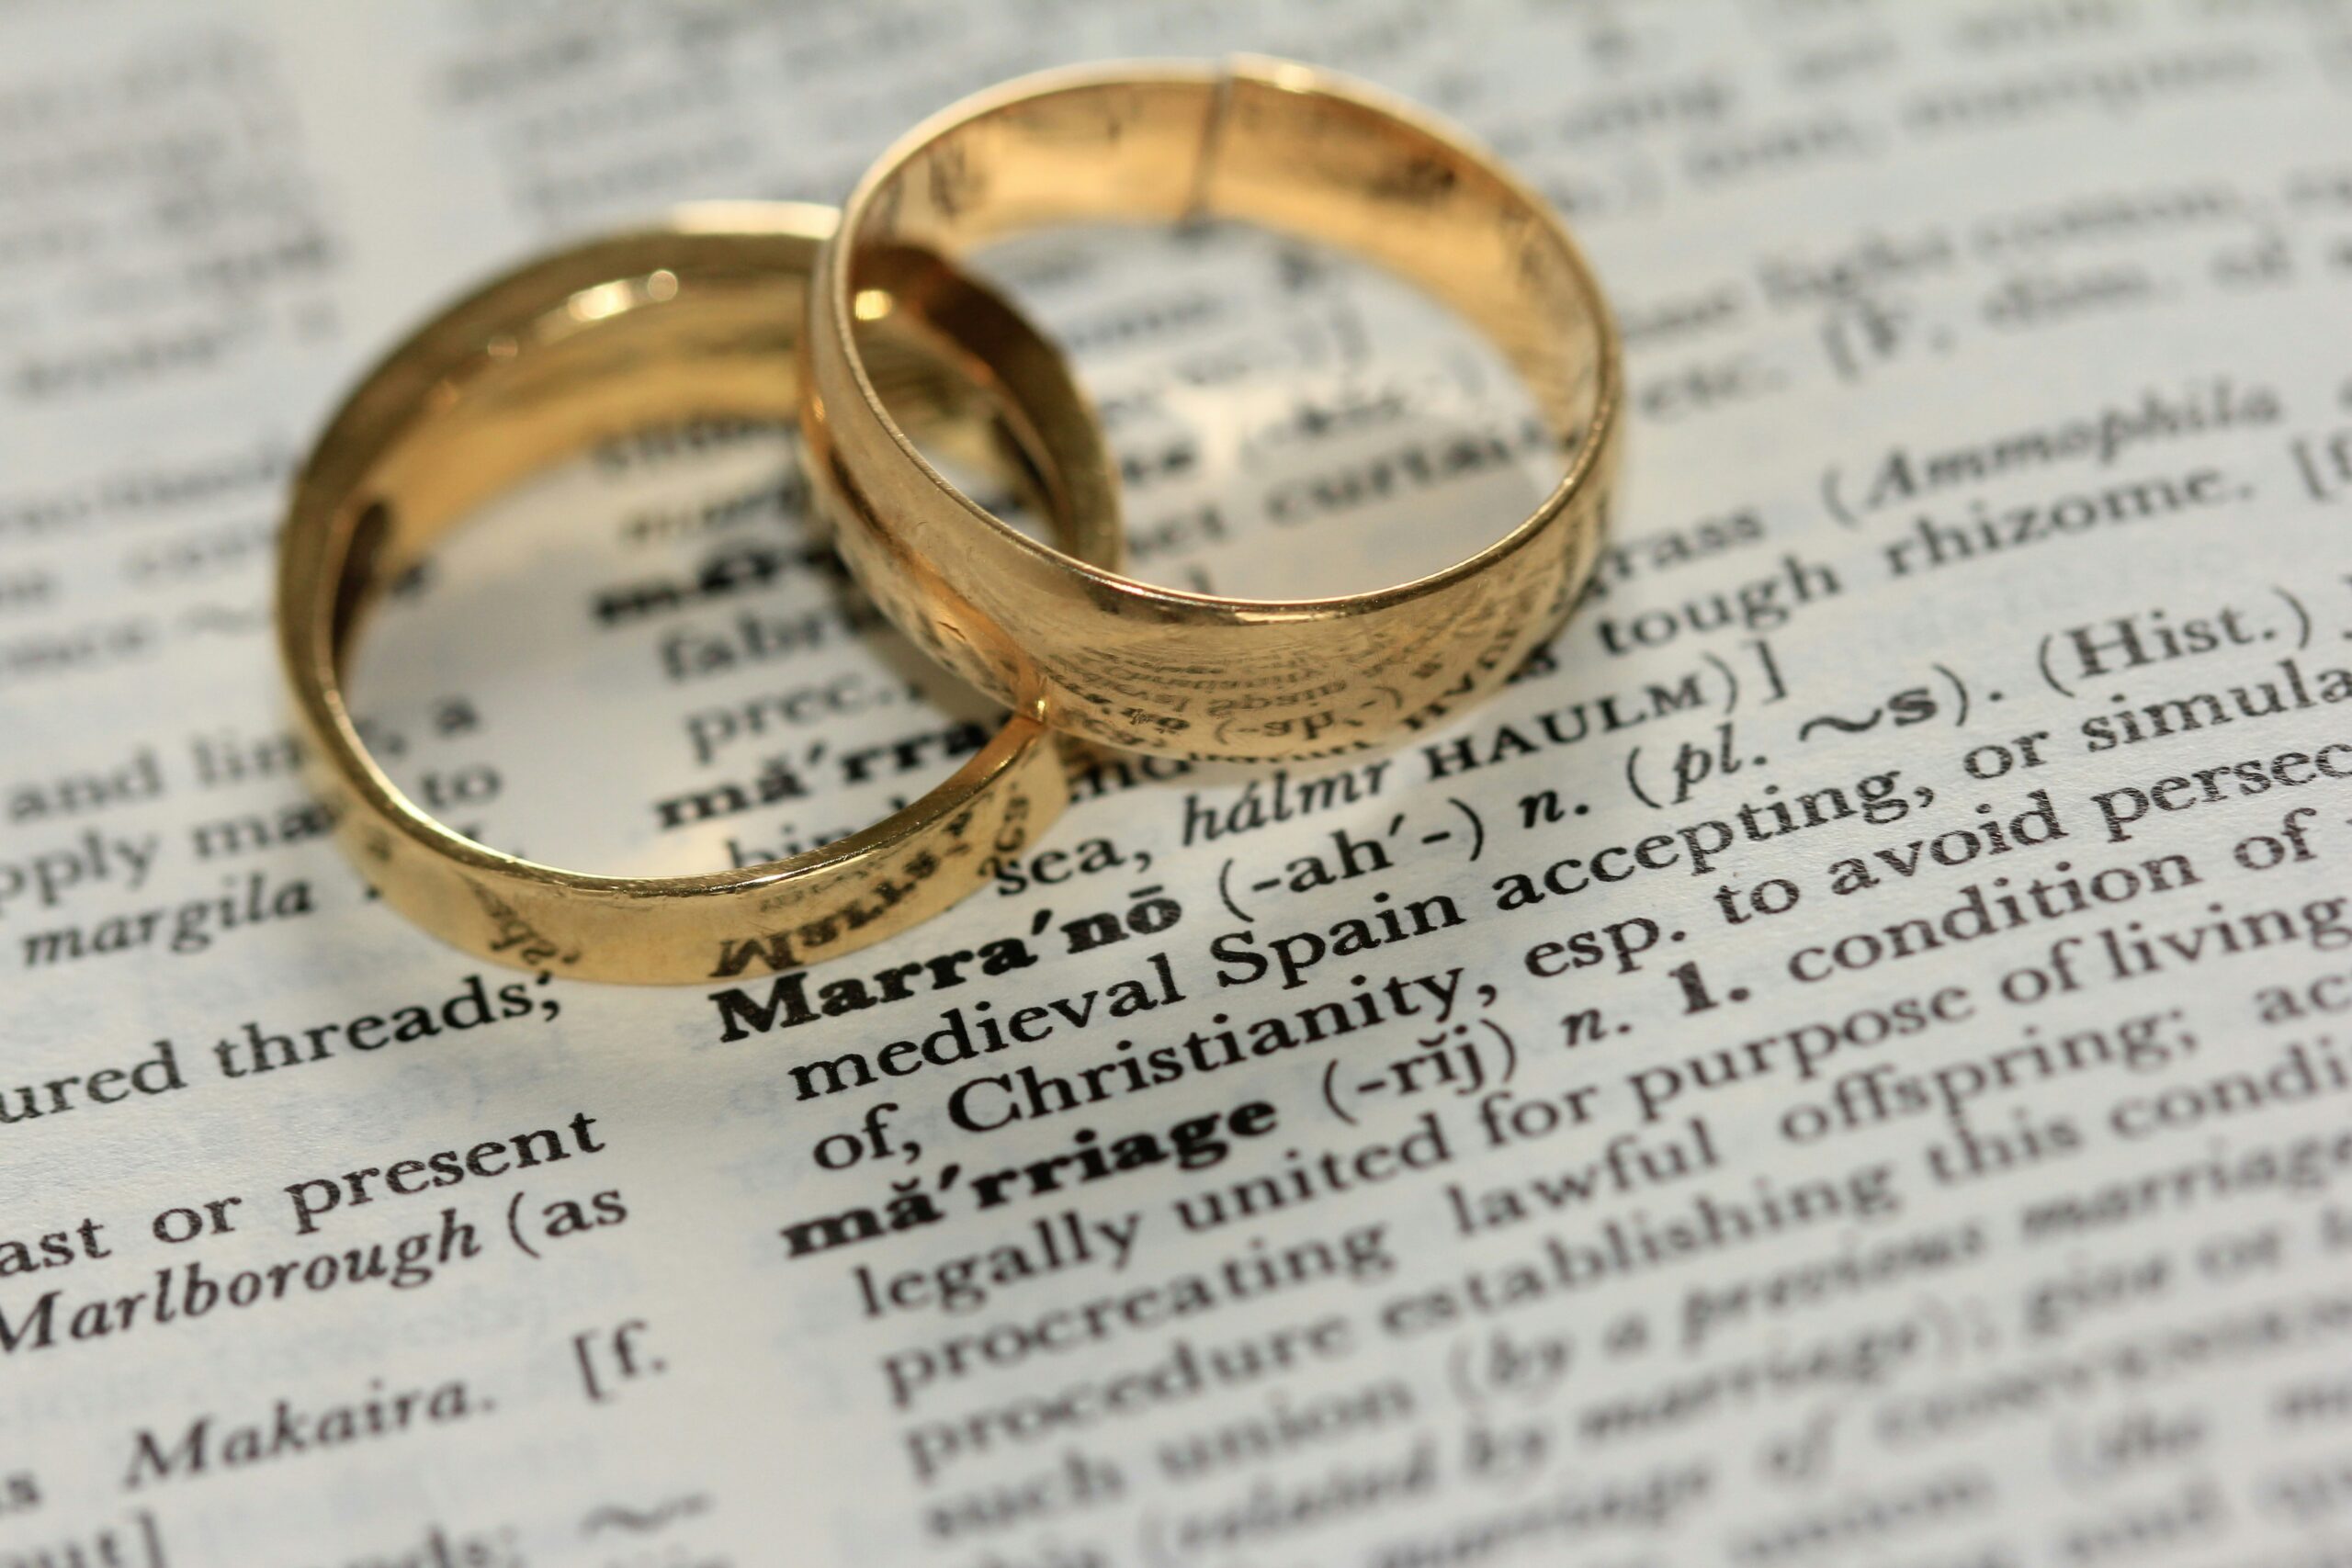 Married couples wedding rings, the definition of marriage below the rings. San Antonio, Tx. Modern Wellness Counseling. 78230,78249,78245,78250,78255,78258.